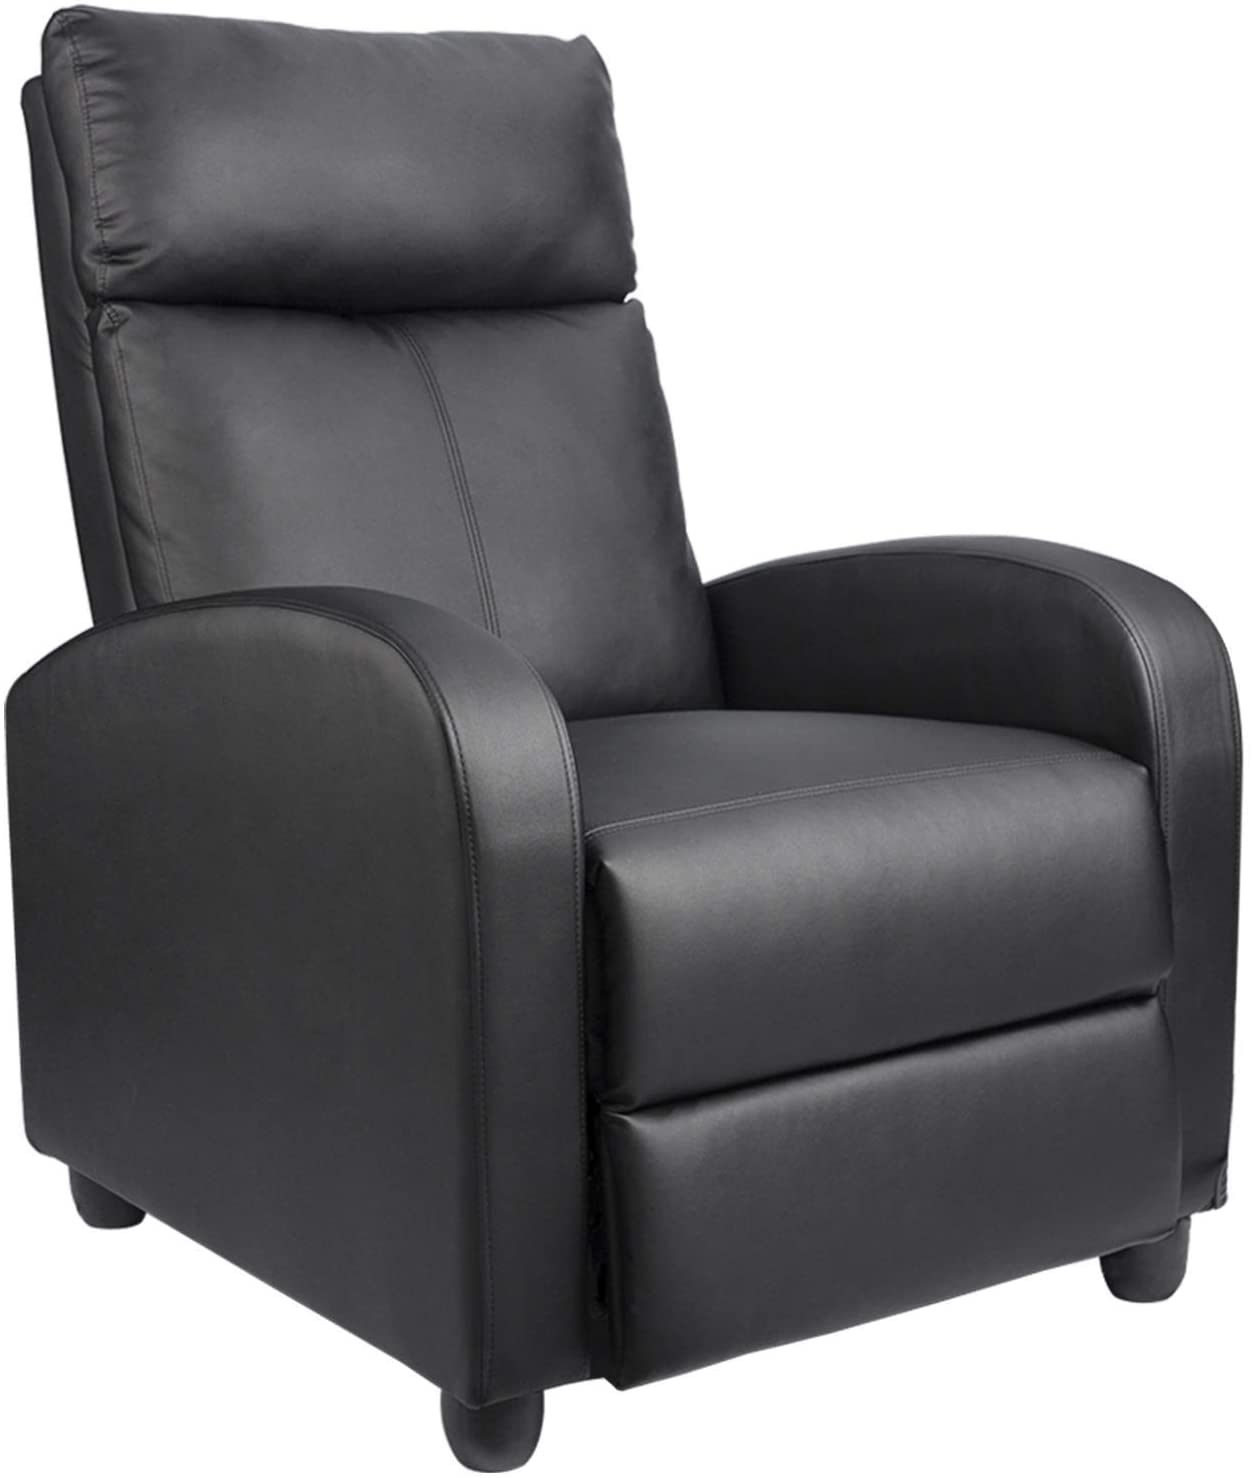 Homall Faux Leather Adjustable Small Recliner Chair